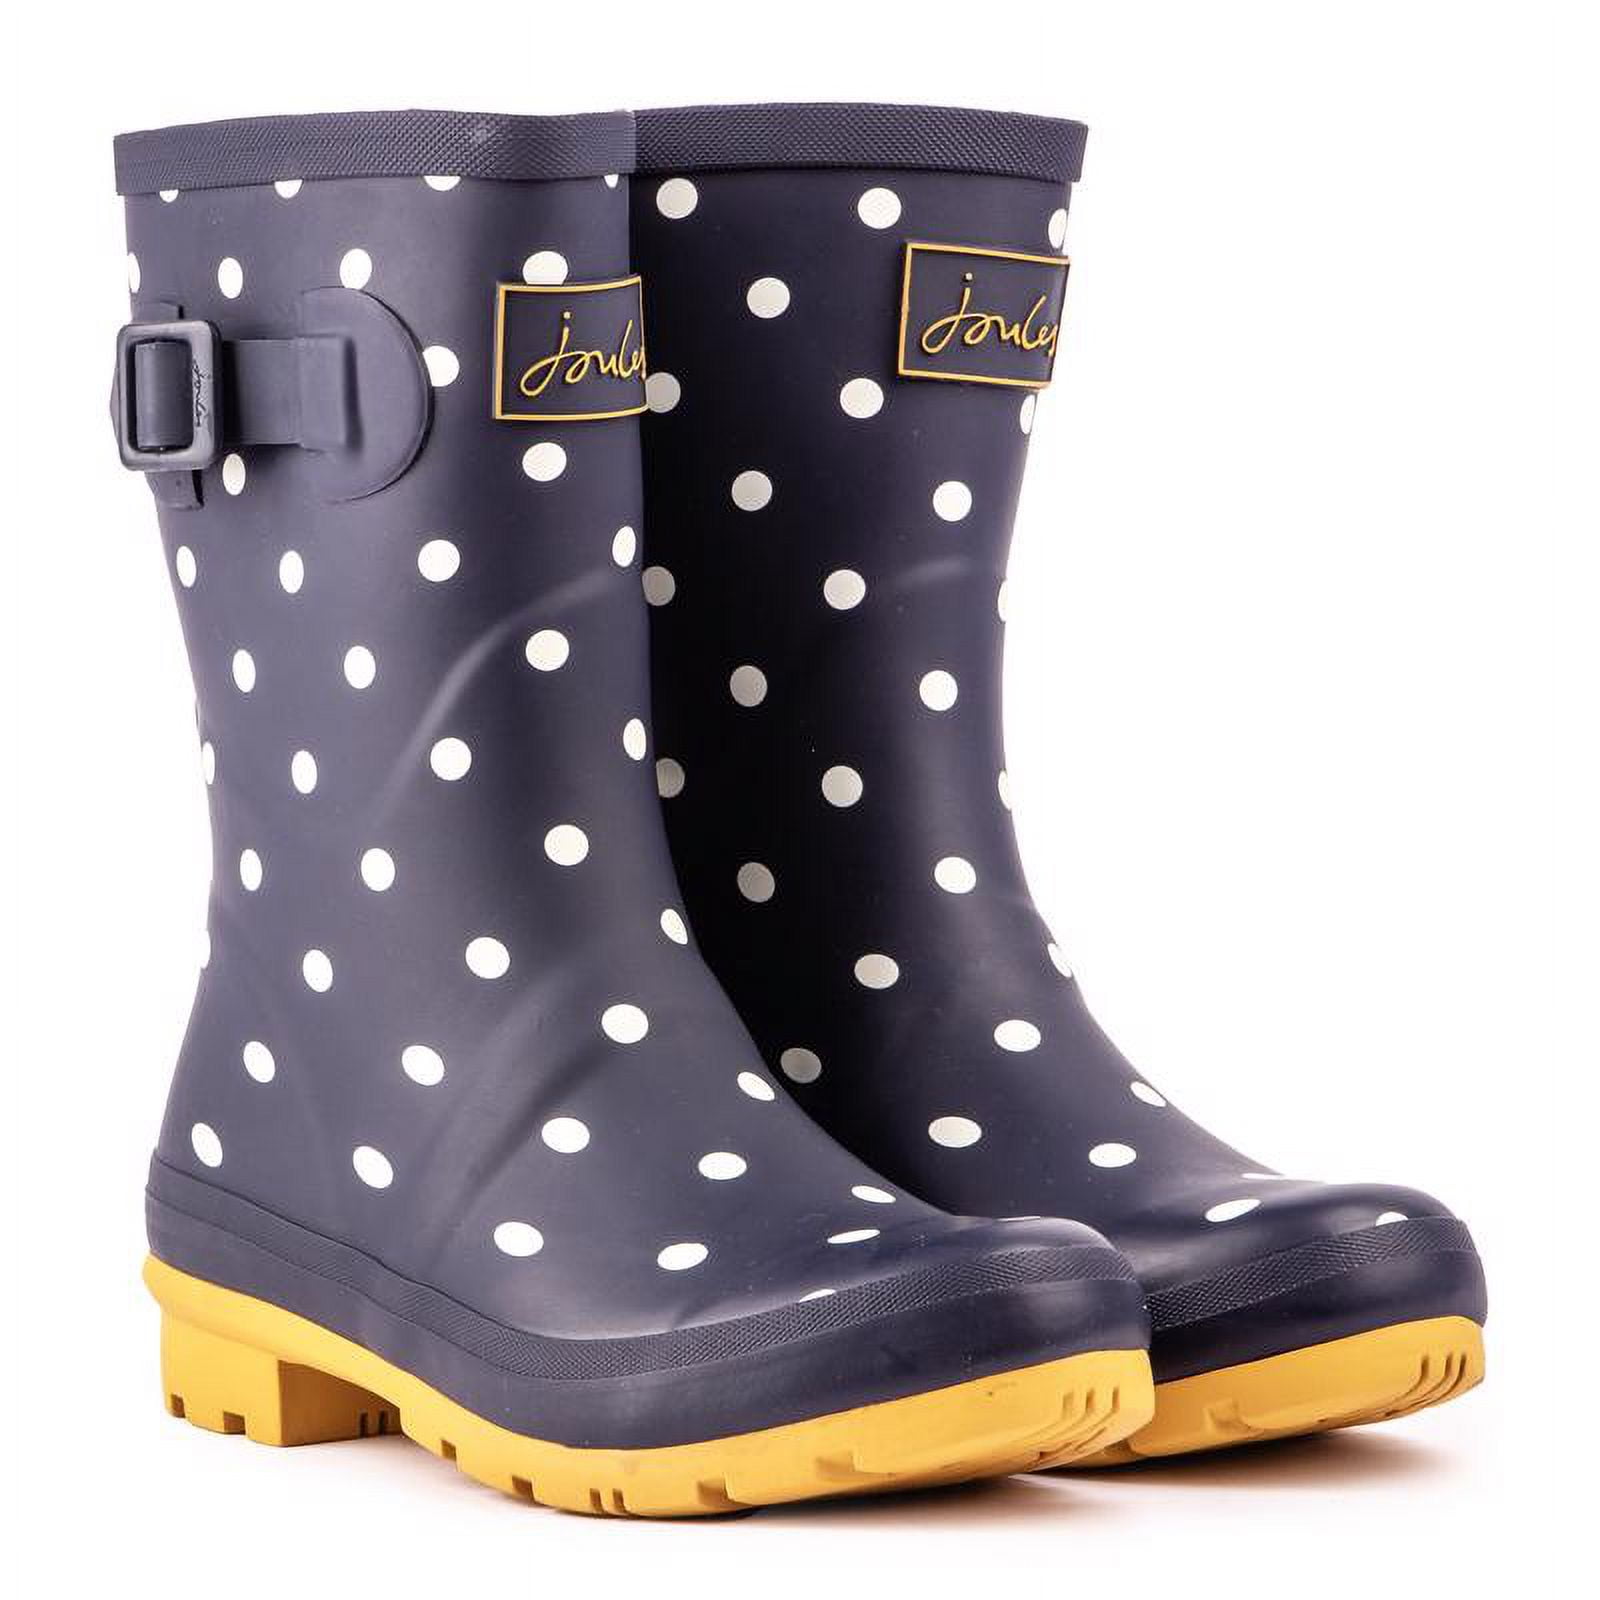 Joules Women's Molly Welly French Navy Spot Knee-High Rubber Rain Boot - 8 M